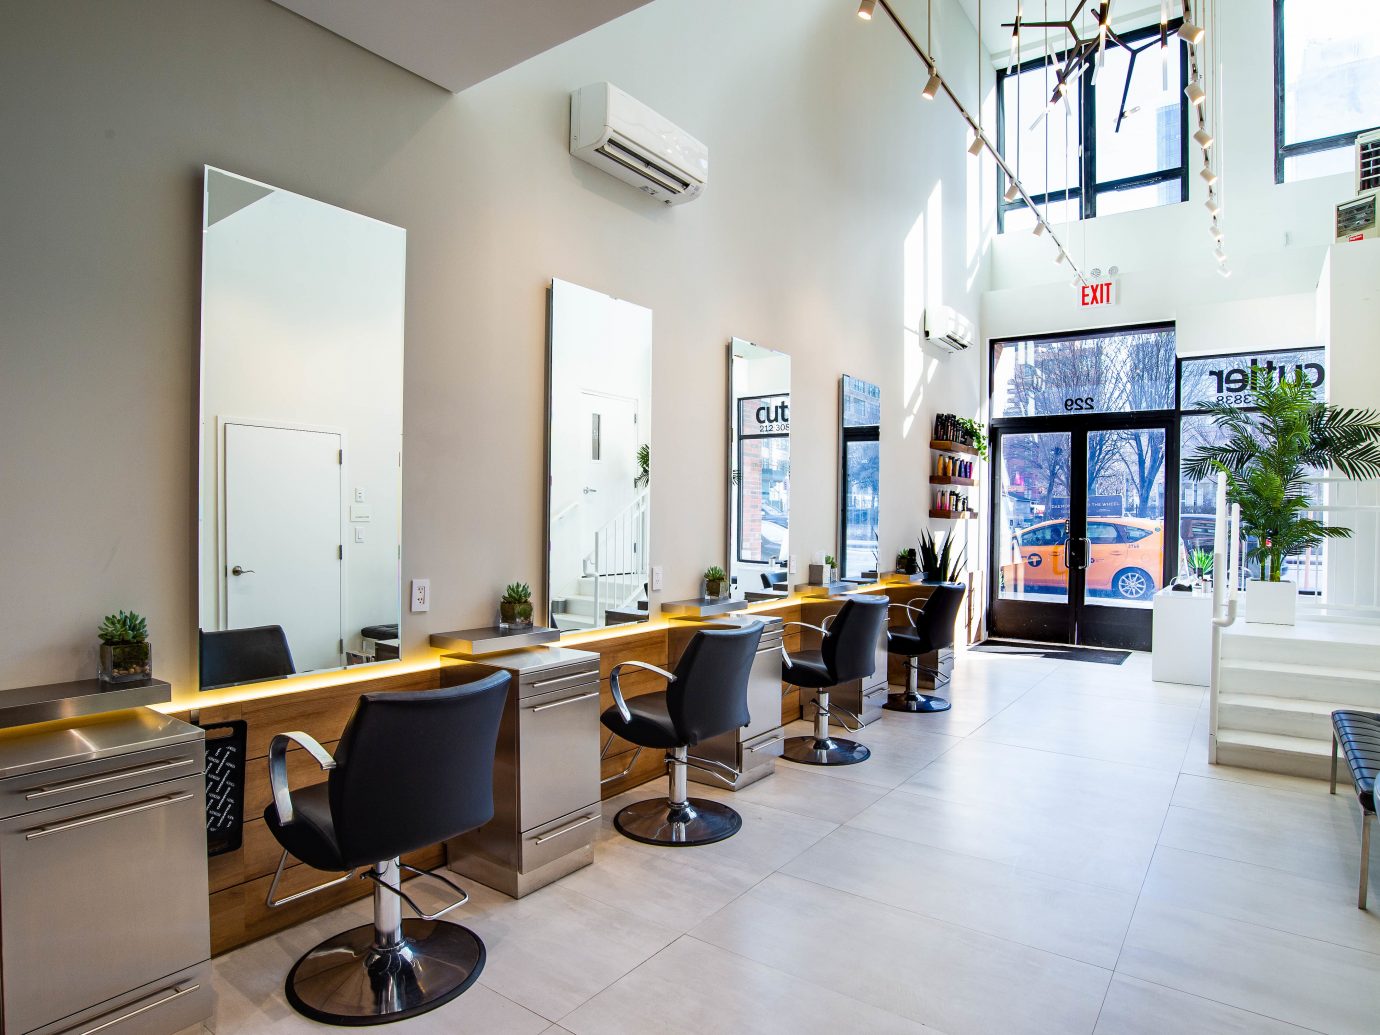 8. "The Top Hair Salons for Getting Dark Hair with Blue Tips" - wide 2